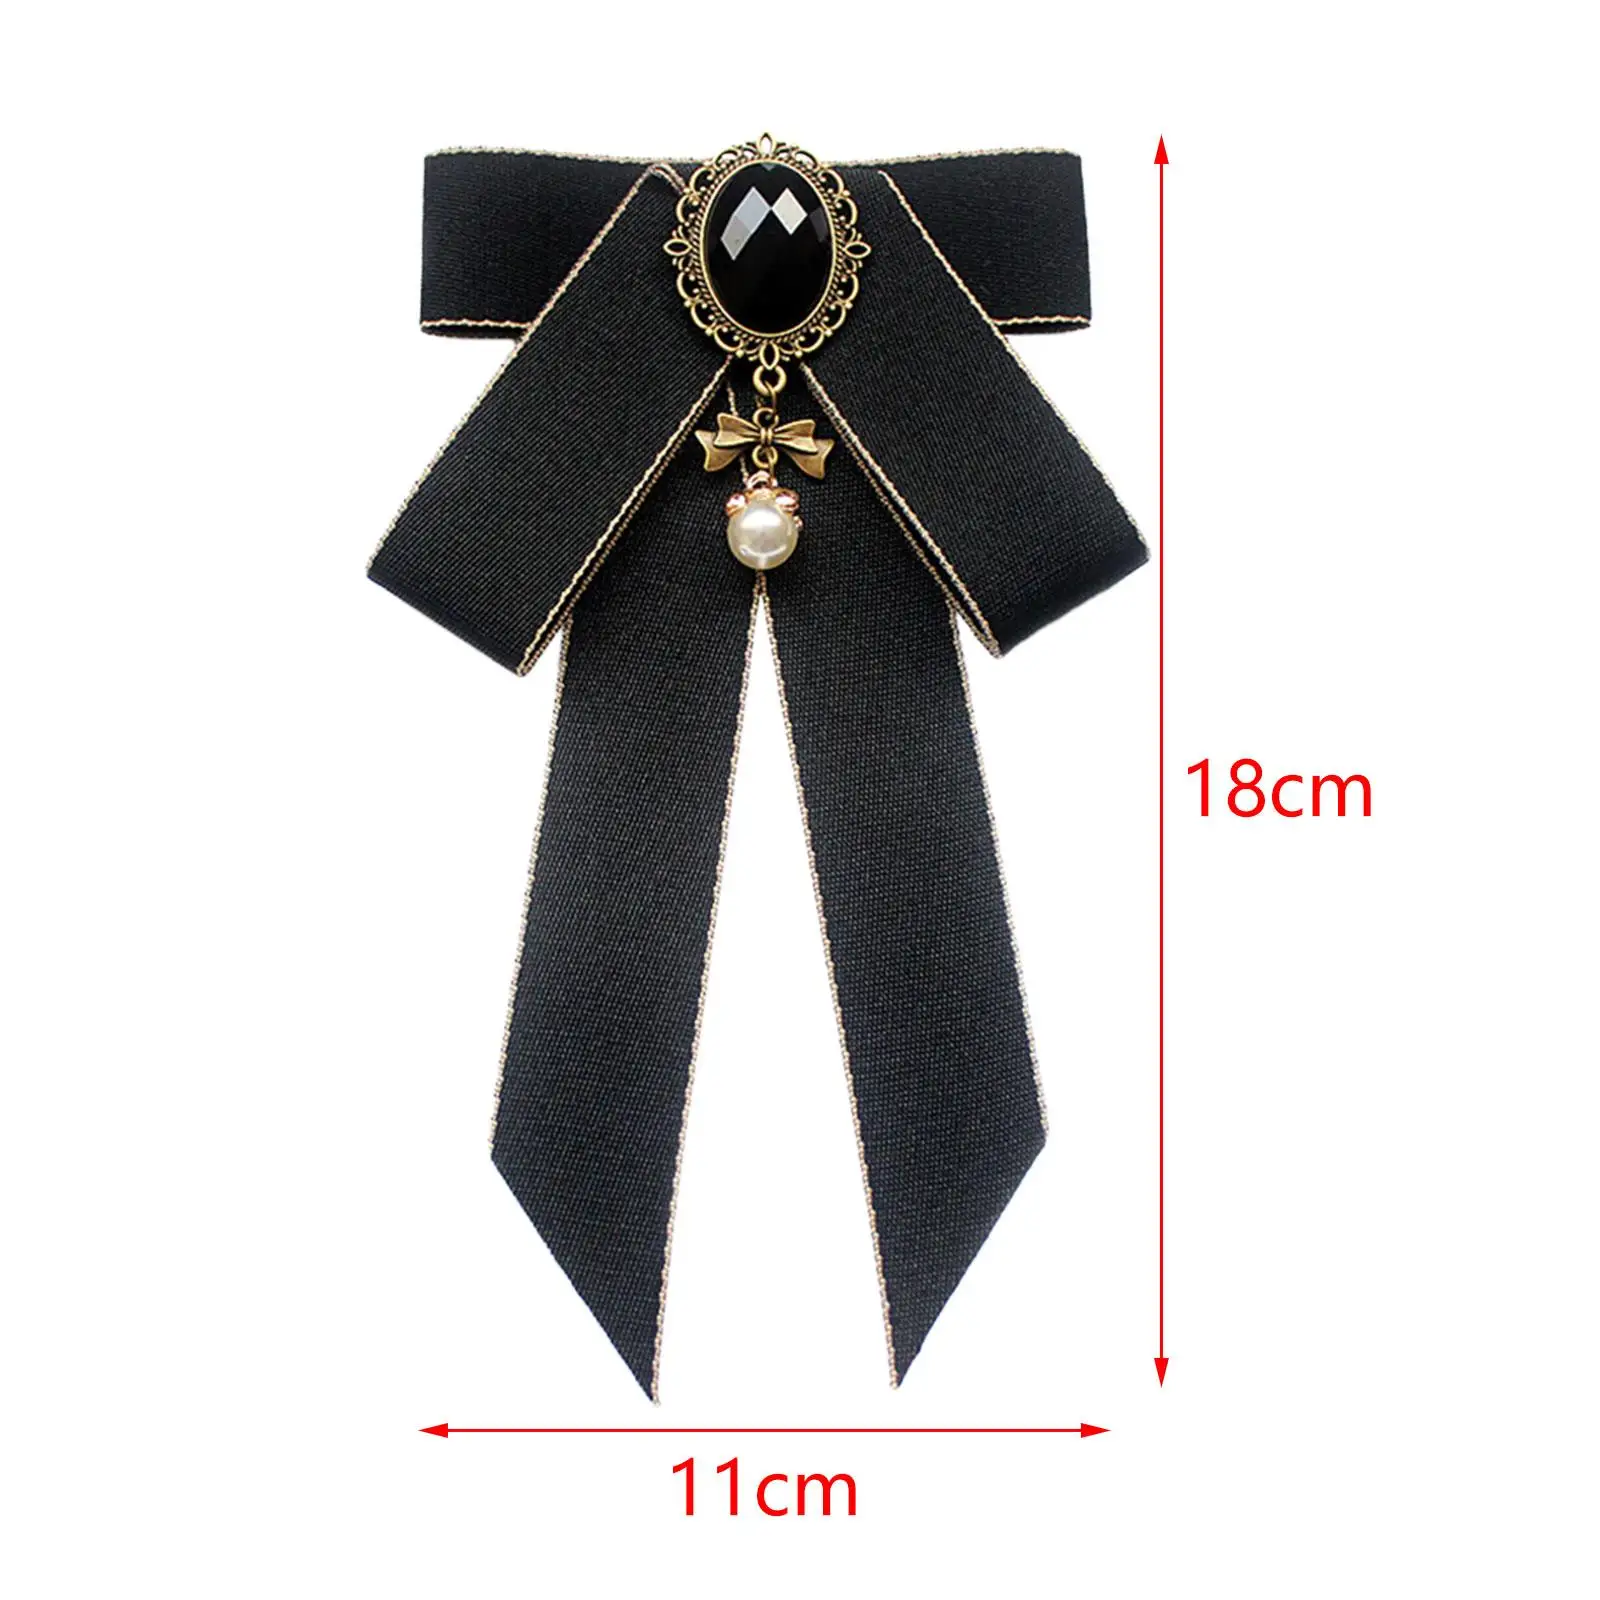 Ribbon Bow Brooch Pre Tied Bowknot Collar Pin Ladies Elegant Neck Tie Necktie for Shirt Suit Uniform Blouse Costume Accessories